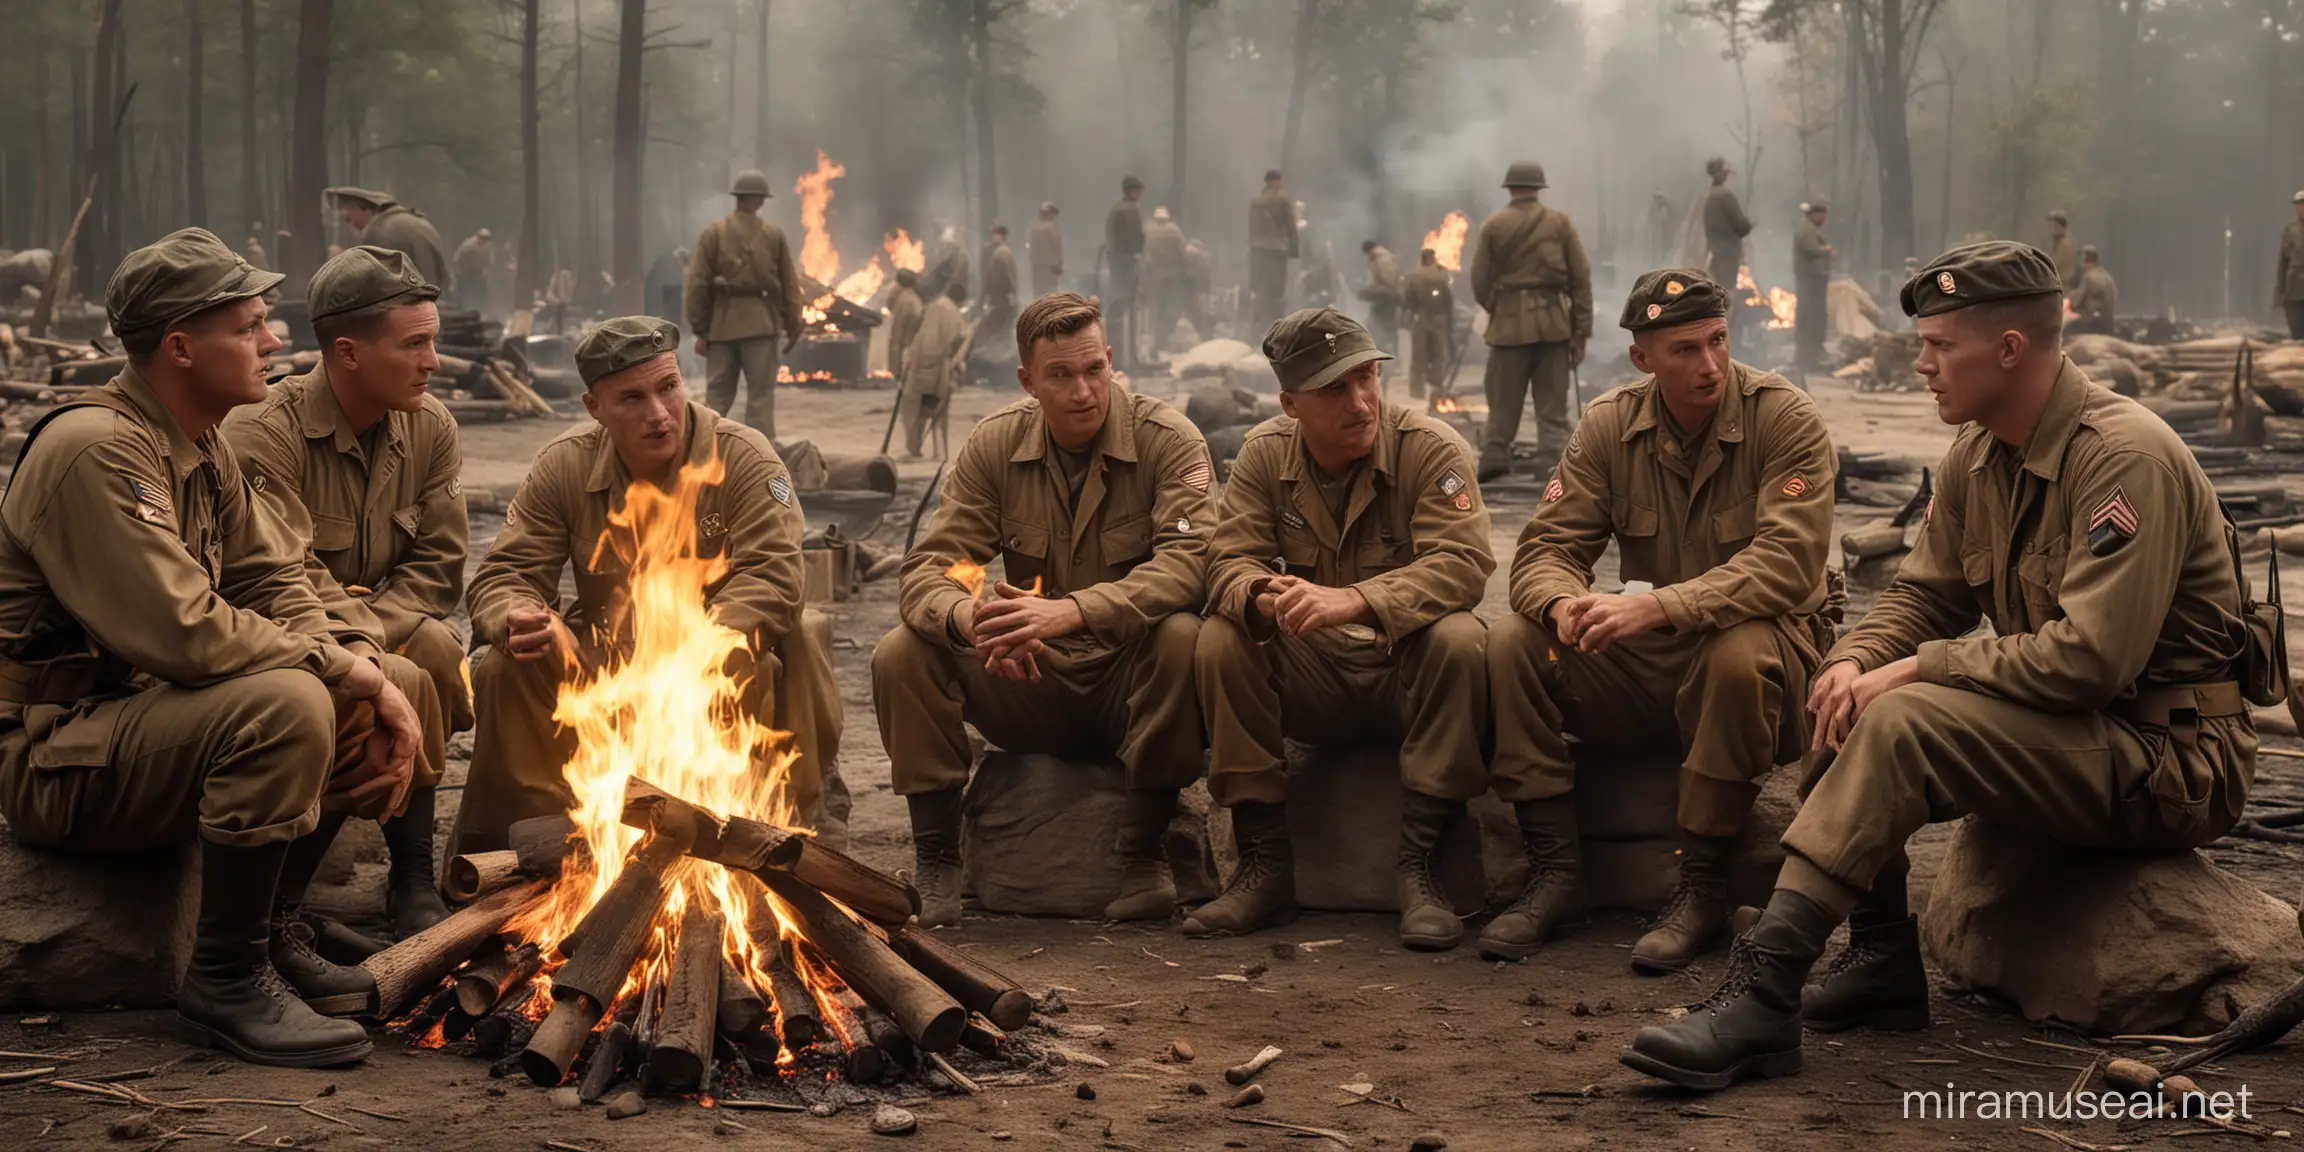 group of WW2 usa soldiers sitting around camp fire. just one of them is standing up and telling fascinating story to others who are in awe and disbelief.